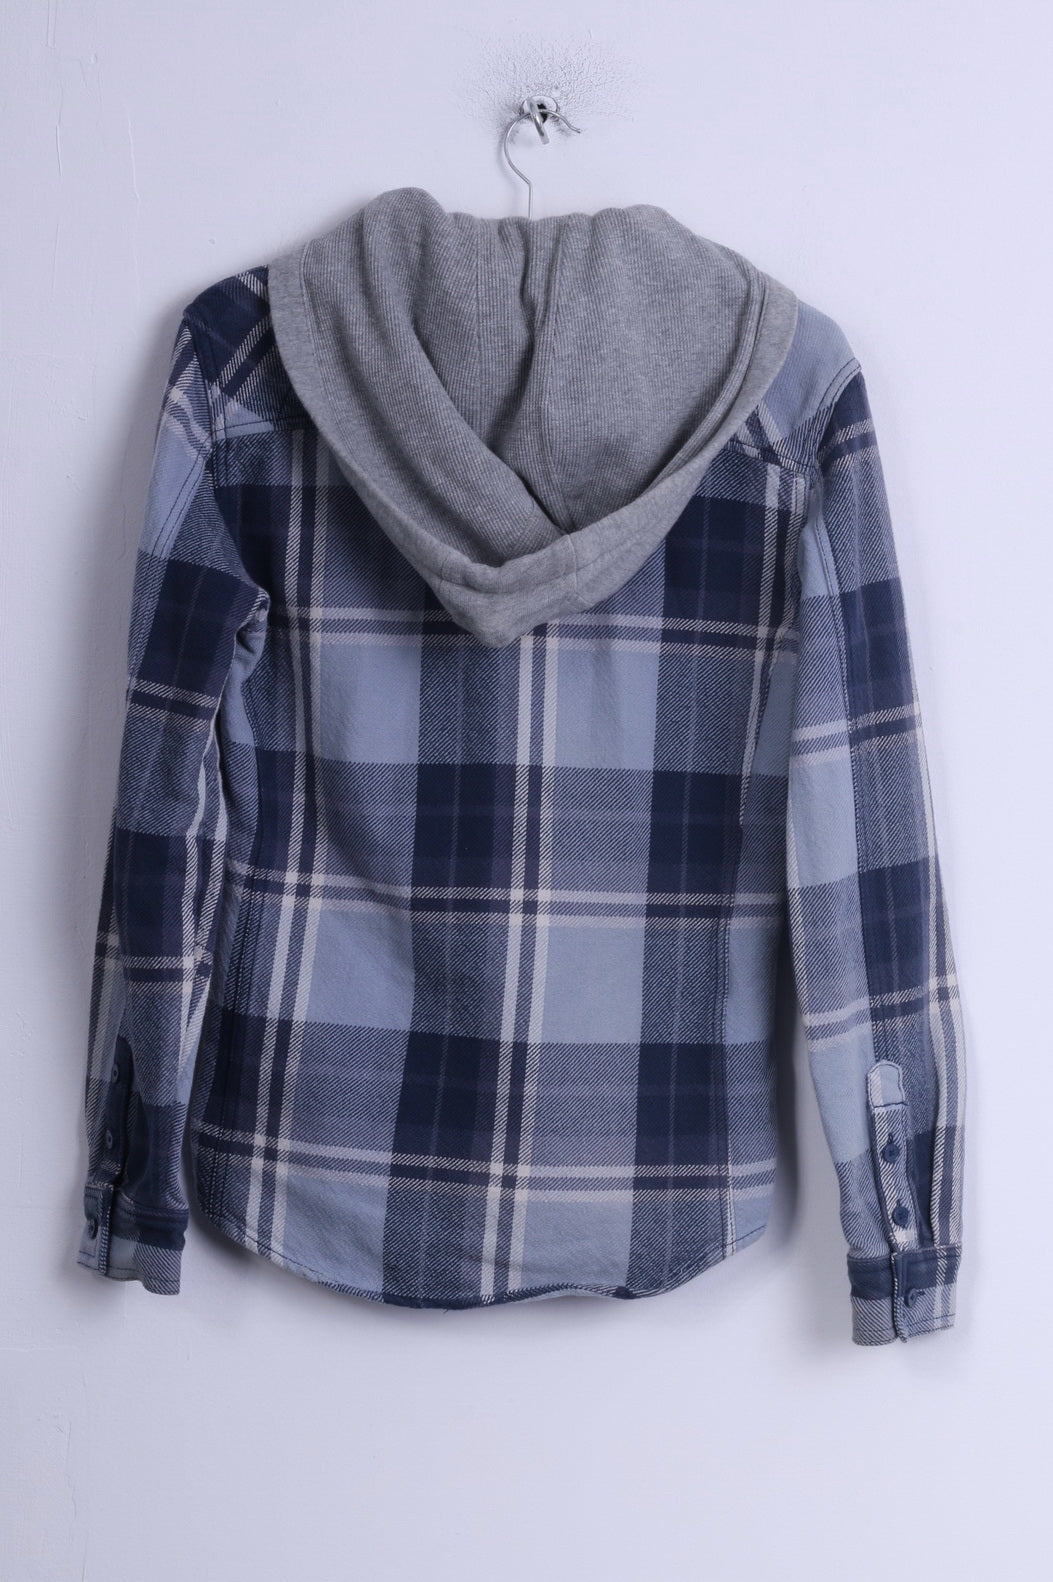 NEXT Mens S Casual Shirt Blue Cotton Long Sleeve Checkered Hooded Worker Top